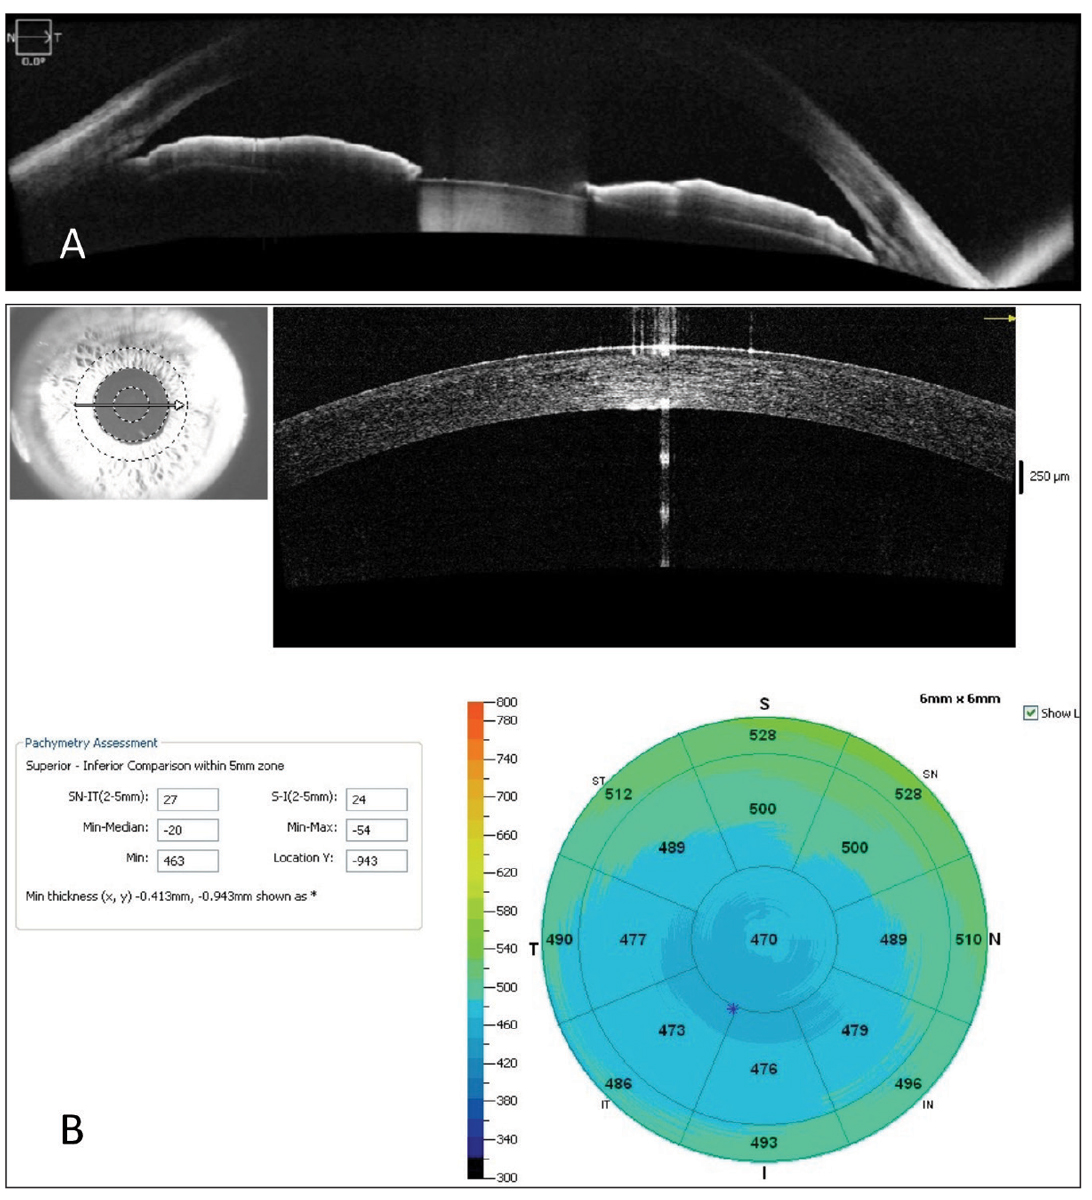 Fig. 5. An anterior segment OCT (A) used to evaluate a patient with anatomically narrow angles taken with Zeiss’s Cirrus OCT, and (B) optical pachymetry measurements performed with the Optovue Avanti OCT from Visionix.